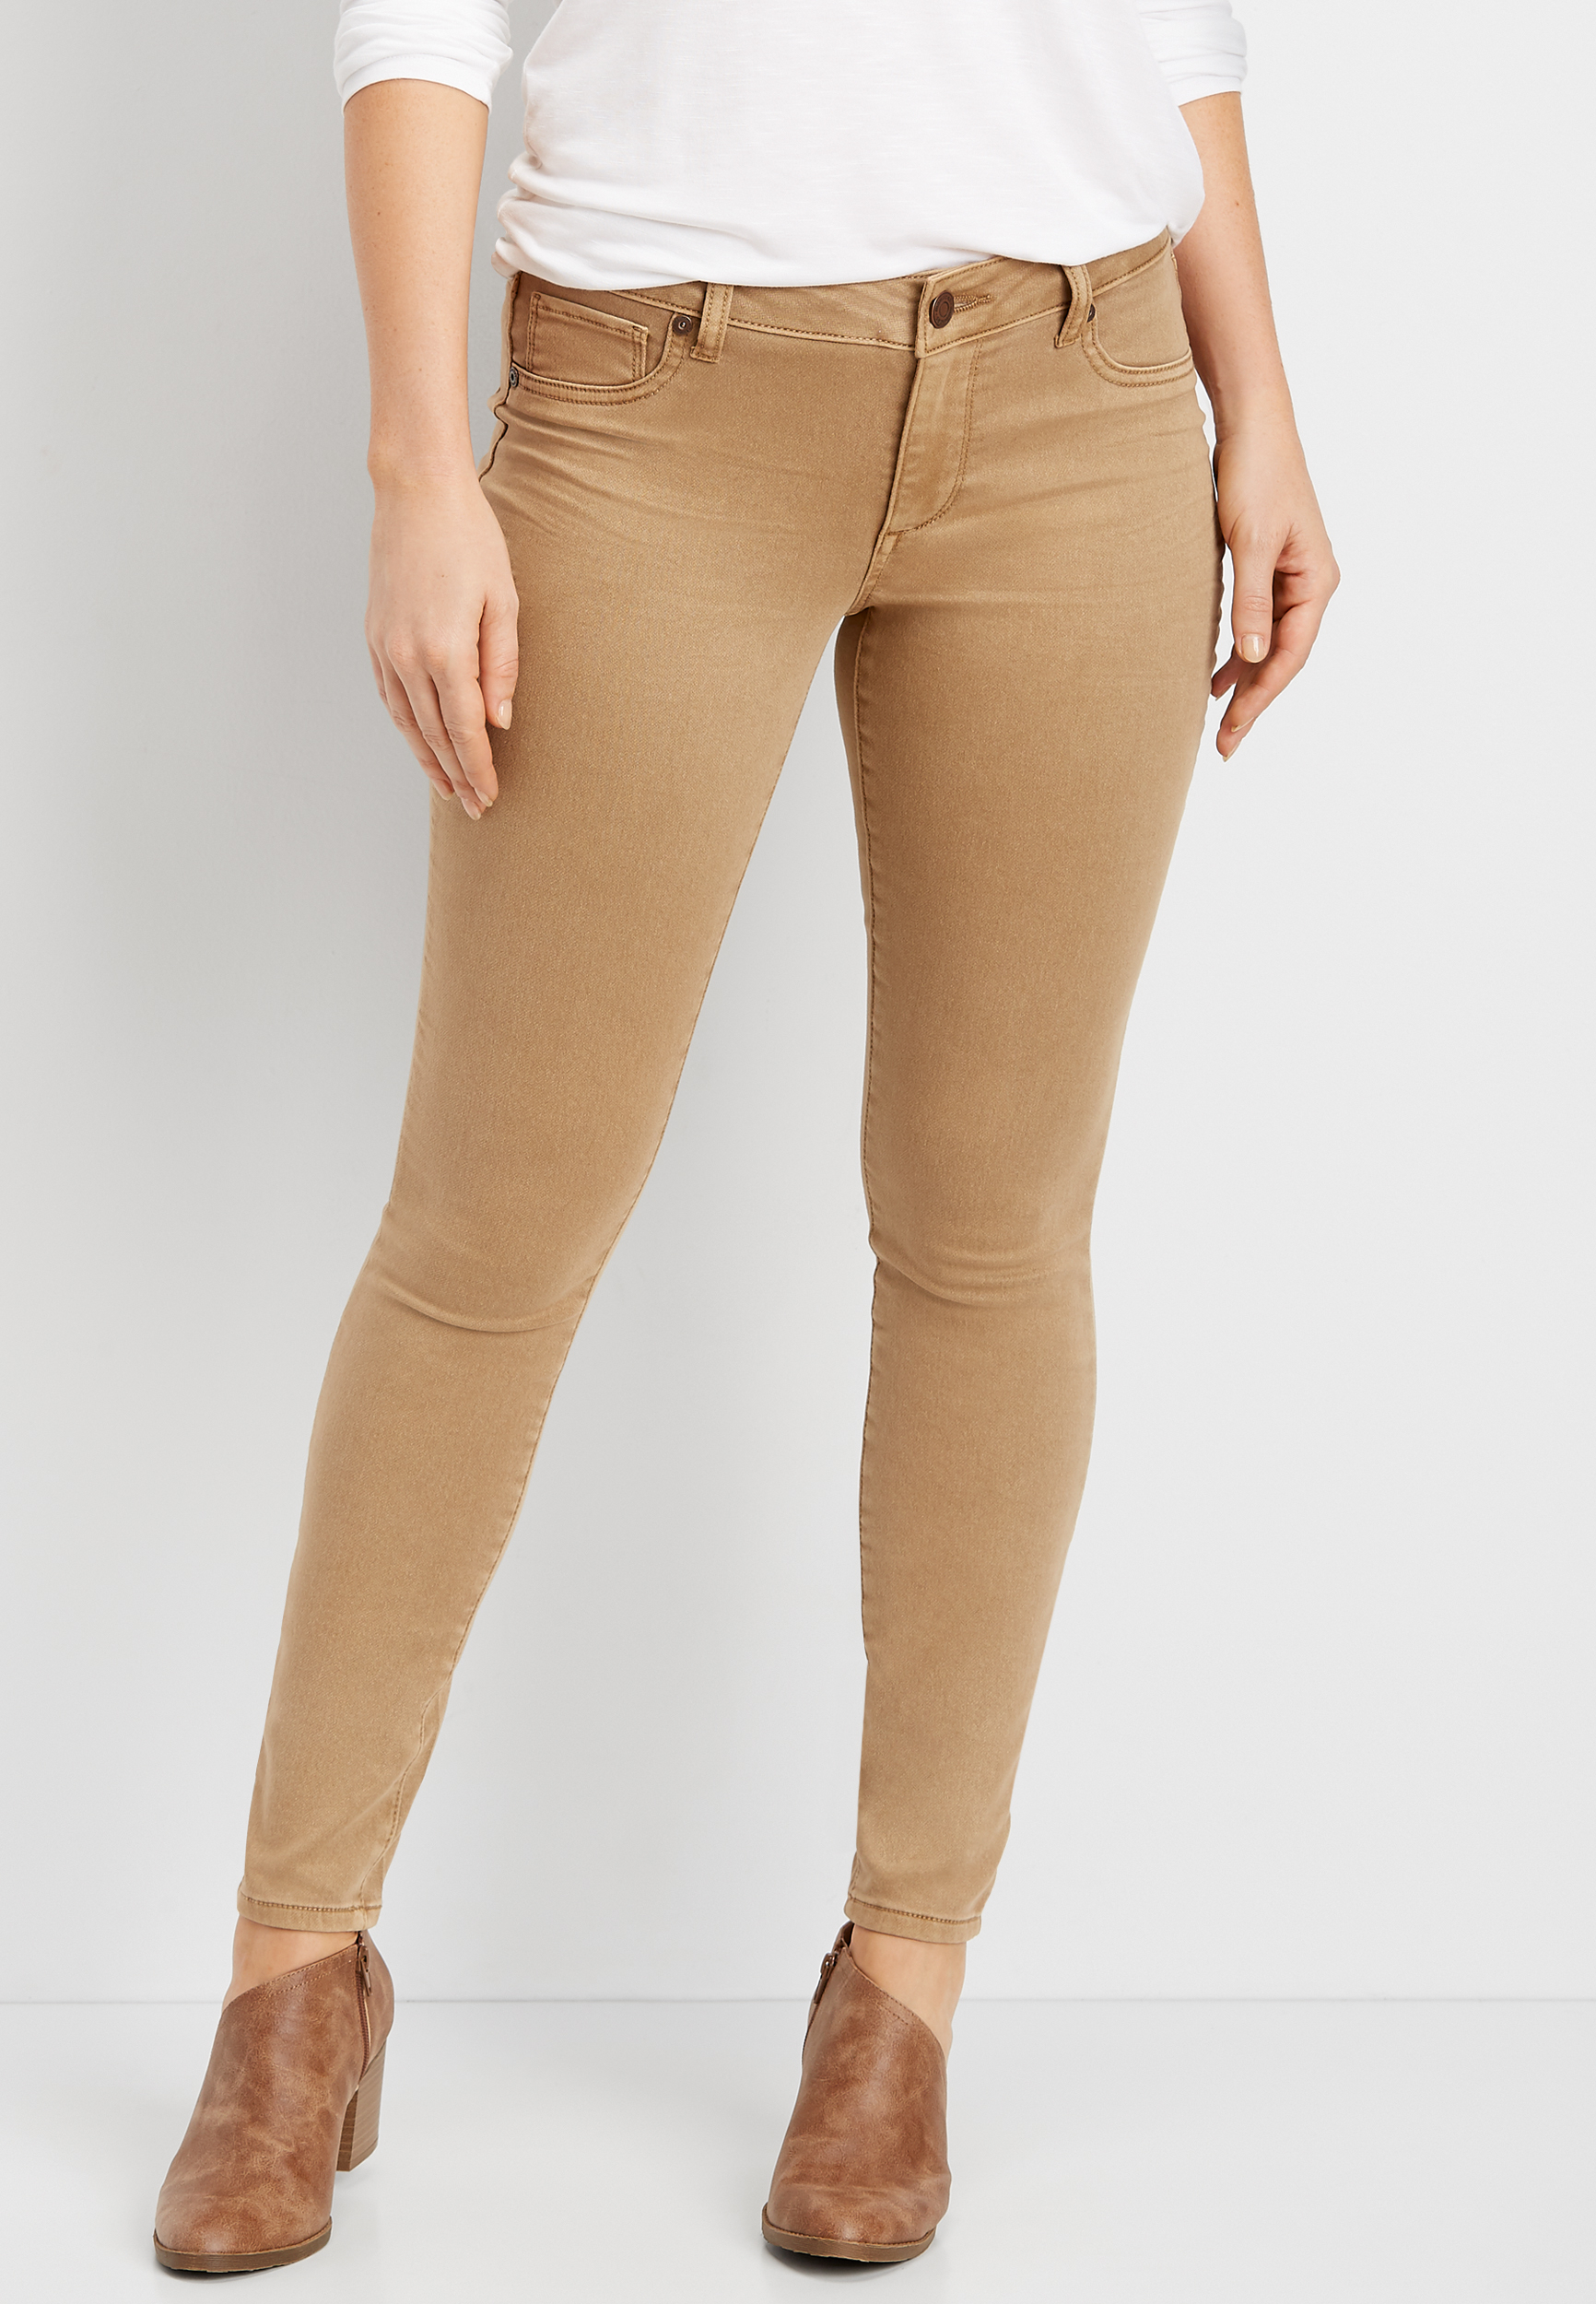 light colored jeggings